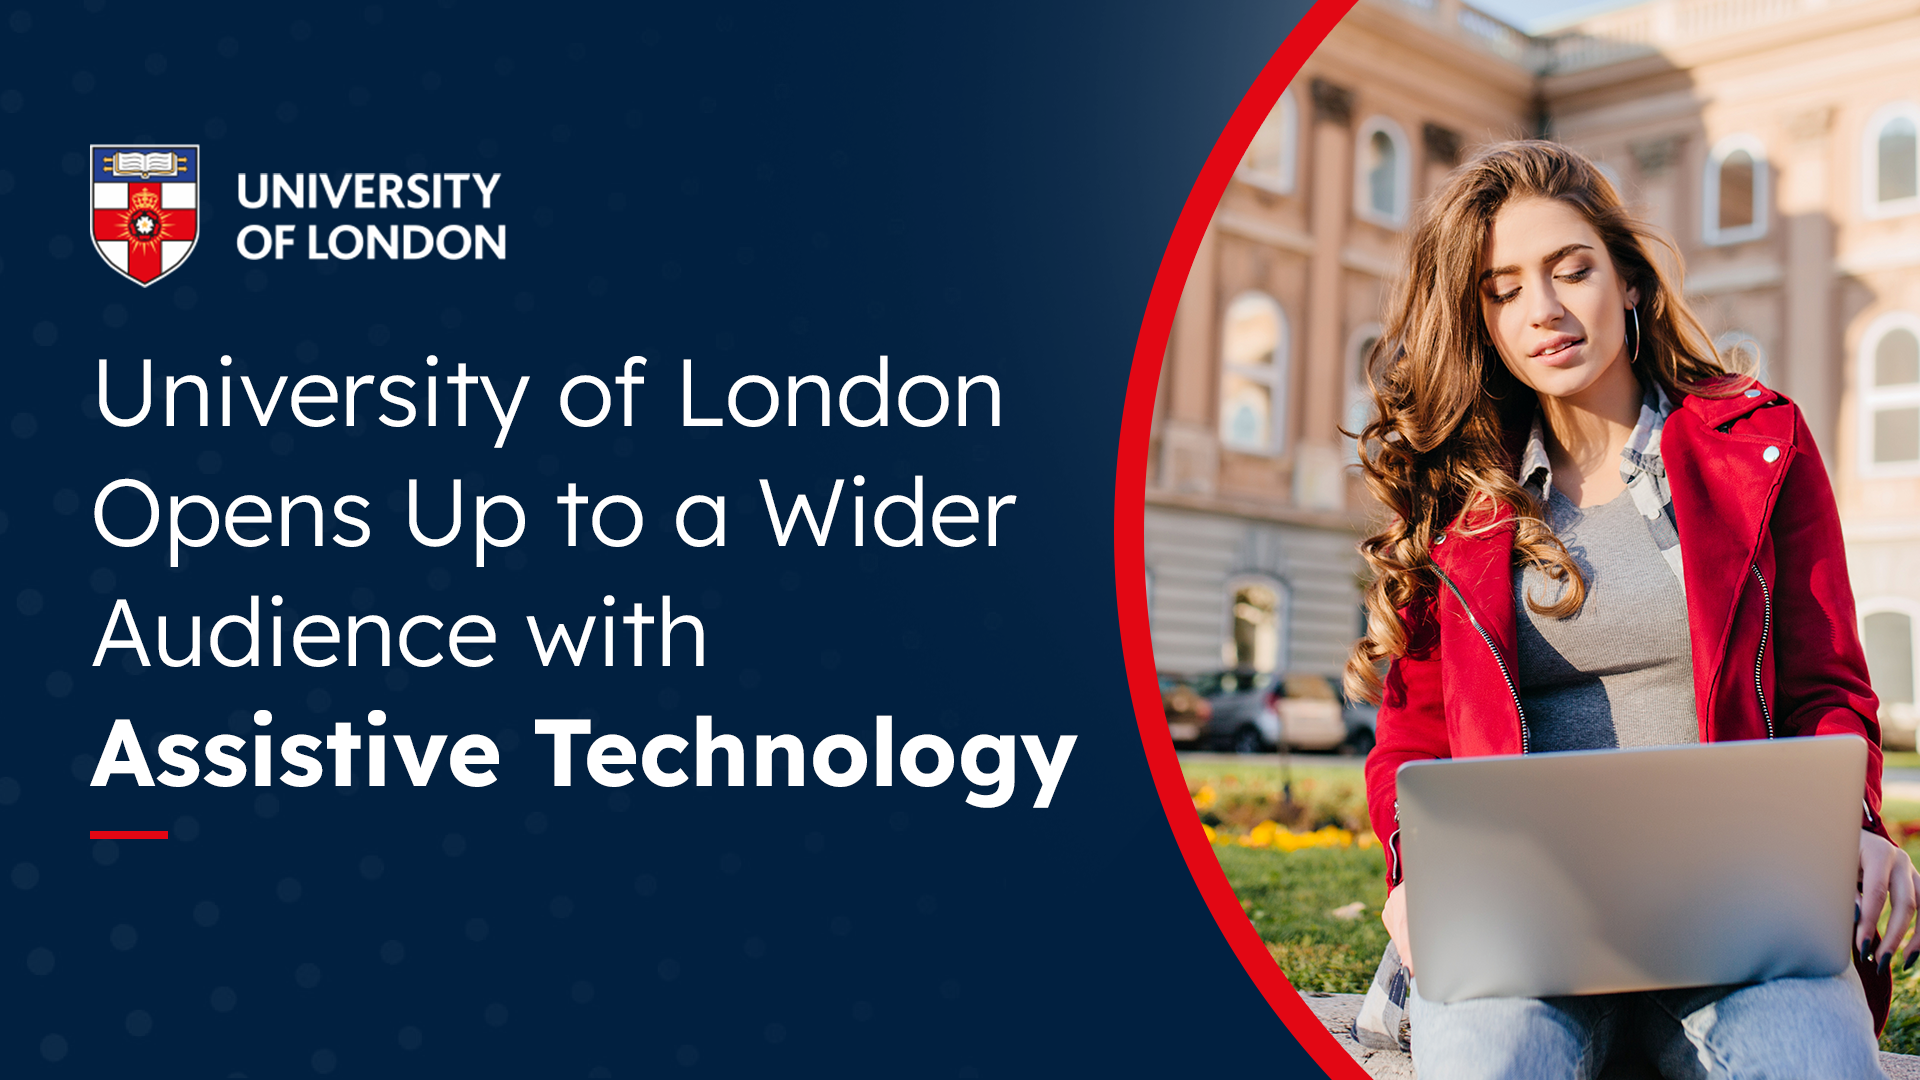 The University of London Opens Up to a Wider Audience with Assistive Technology